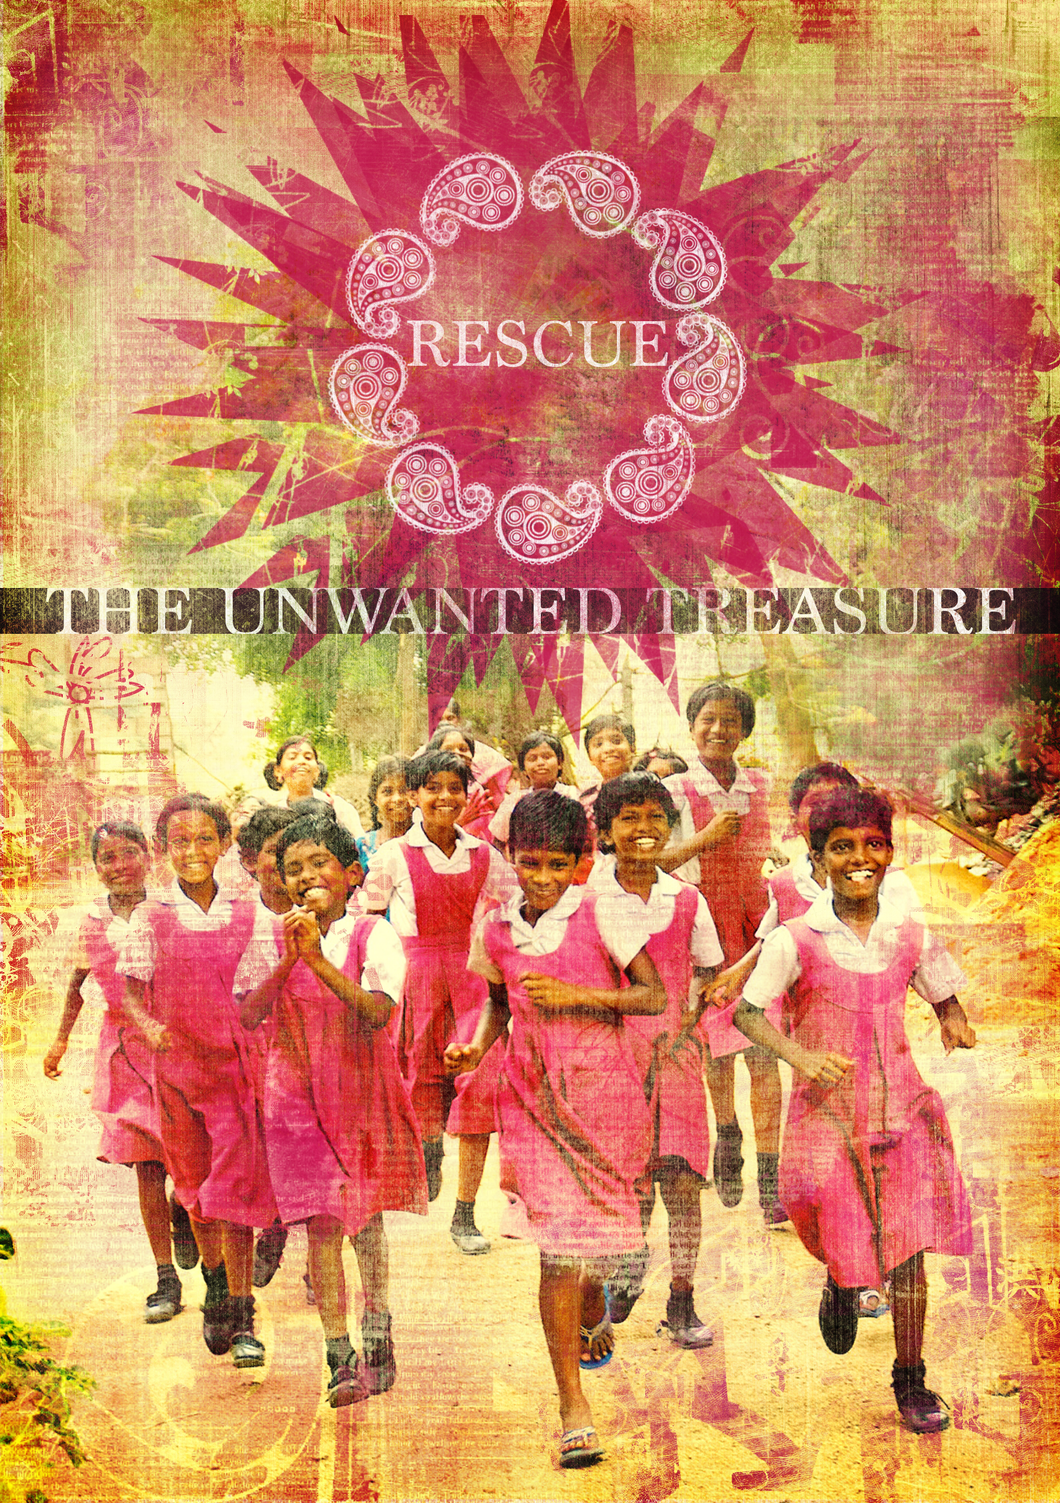 RESCUE: The Unwanted Treasure